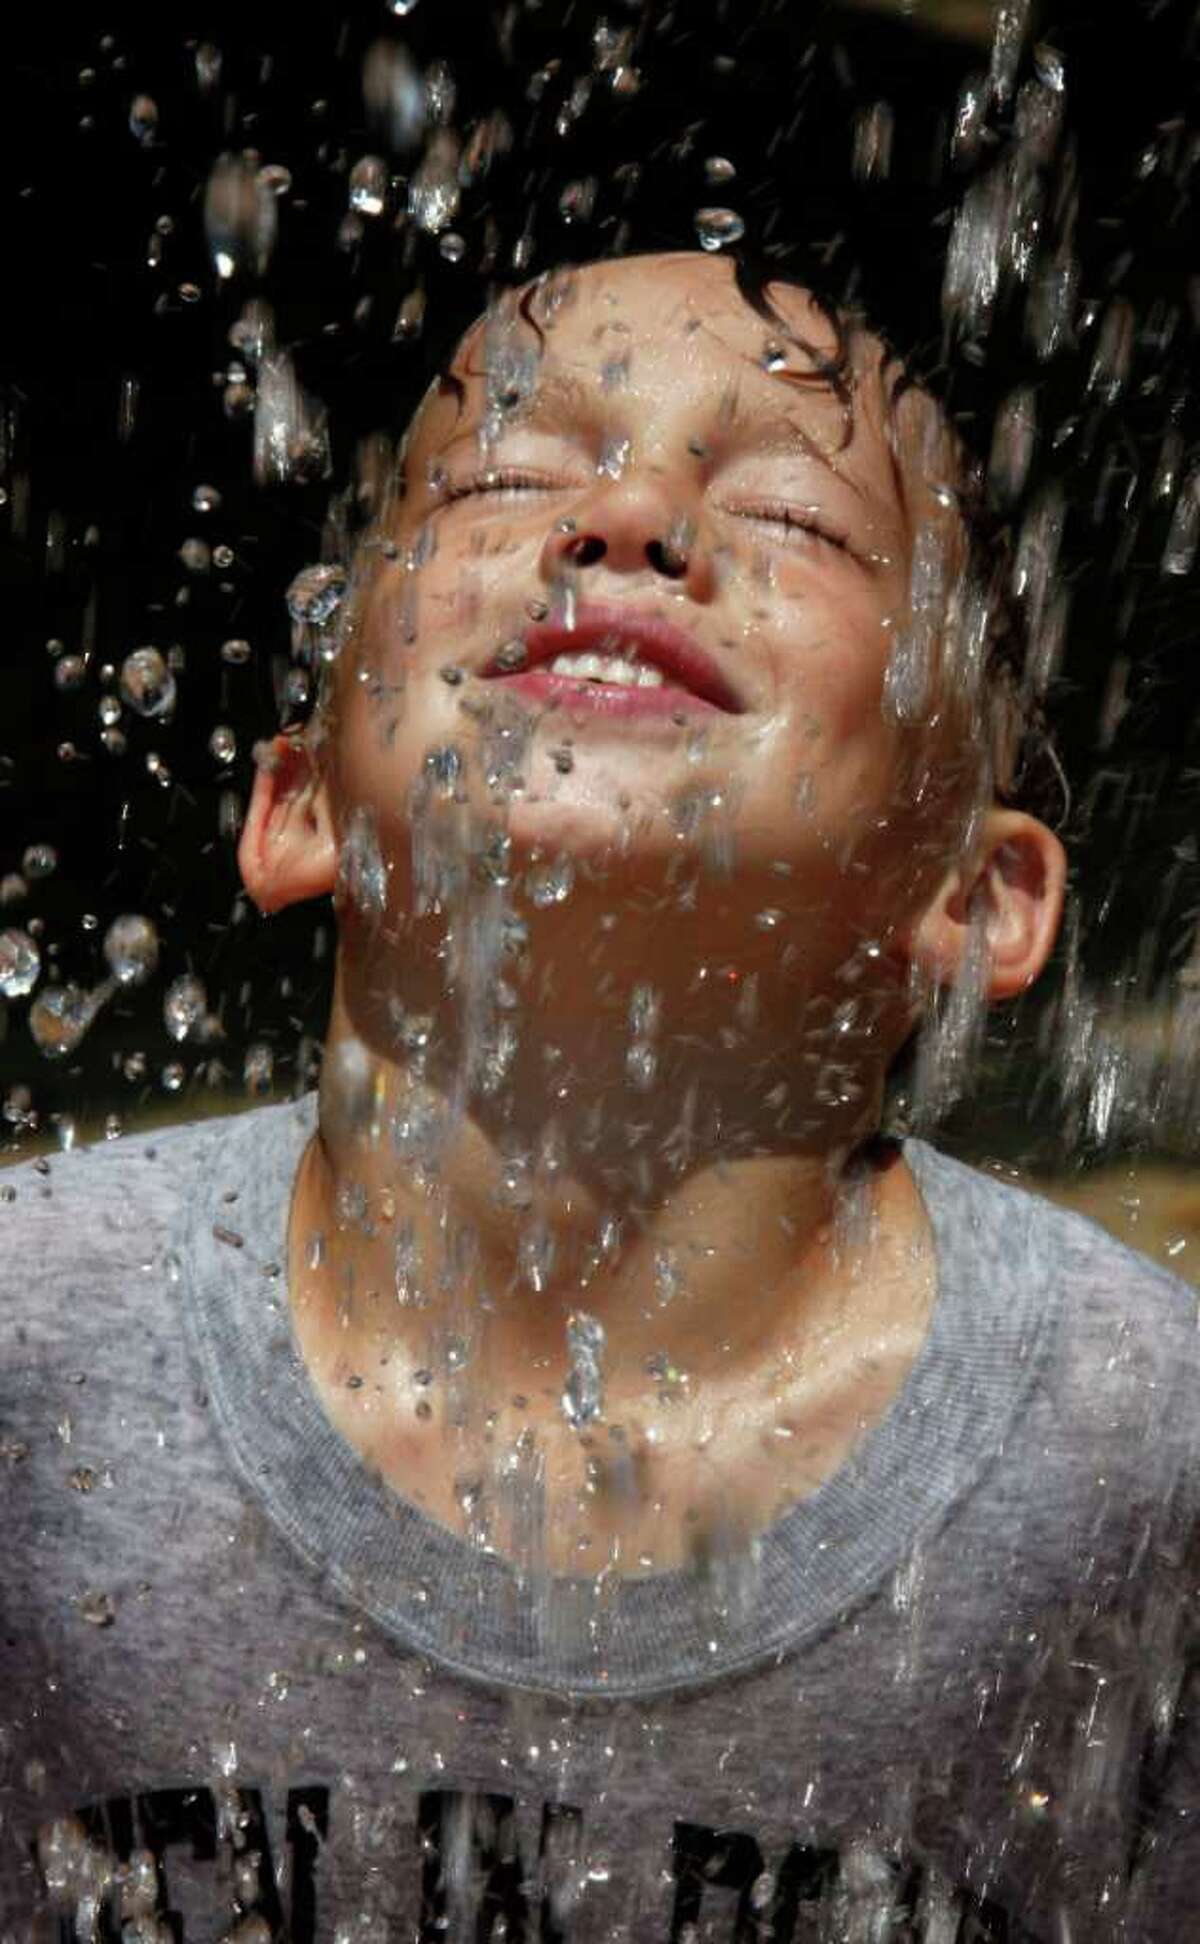 Carson Dziekan cools off playing in a water fountain during the hot summer weather at a park in Batavia, N.Y., on Monday,.